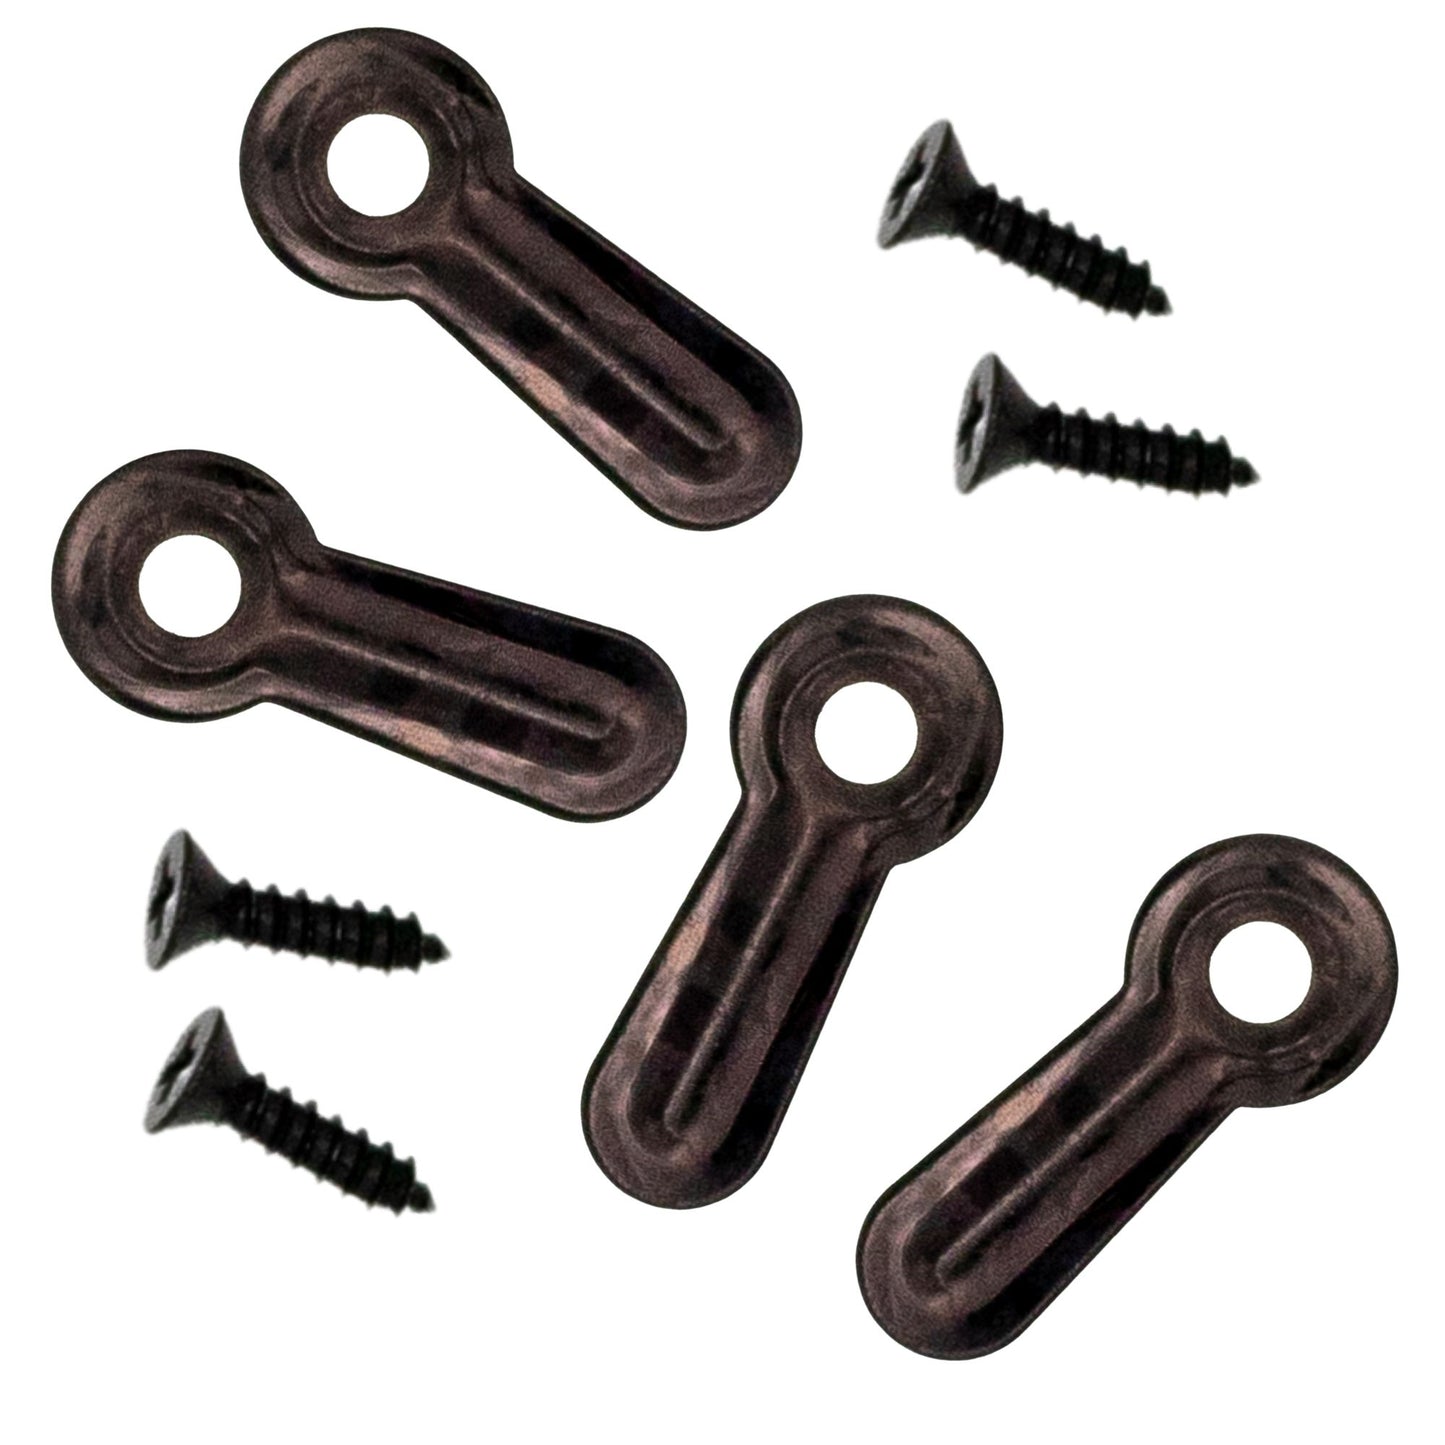 1" Black Turn Button Fasteners with Screws